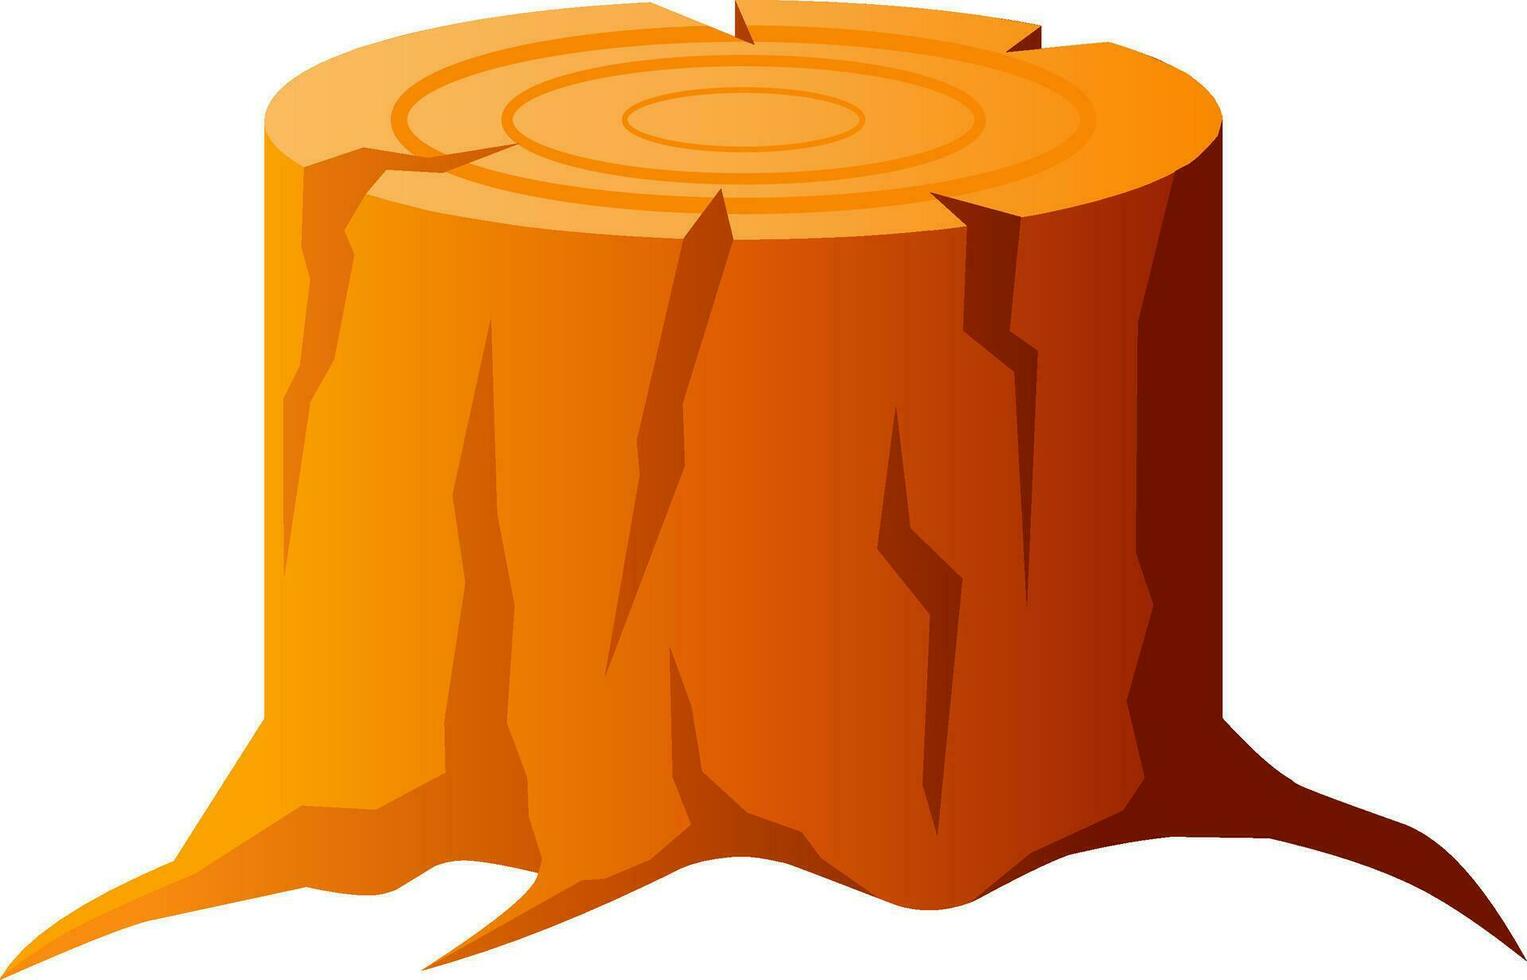 Autumn tree stump vector icon. Stump fall season icon with gradient color. Autumn graphic resource for icon, sign, symbol or decoration. Stump from the fallen tree in the fall season